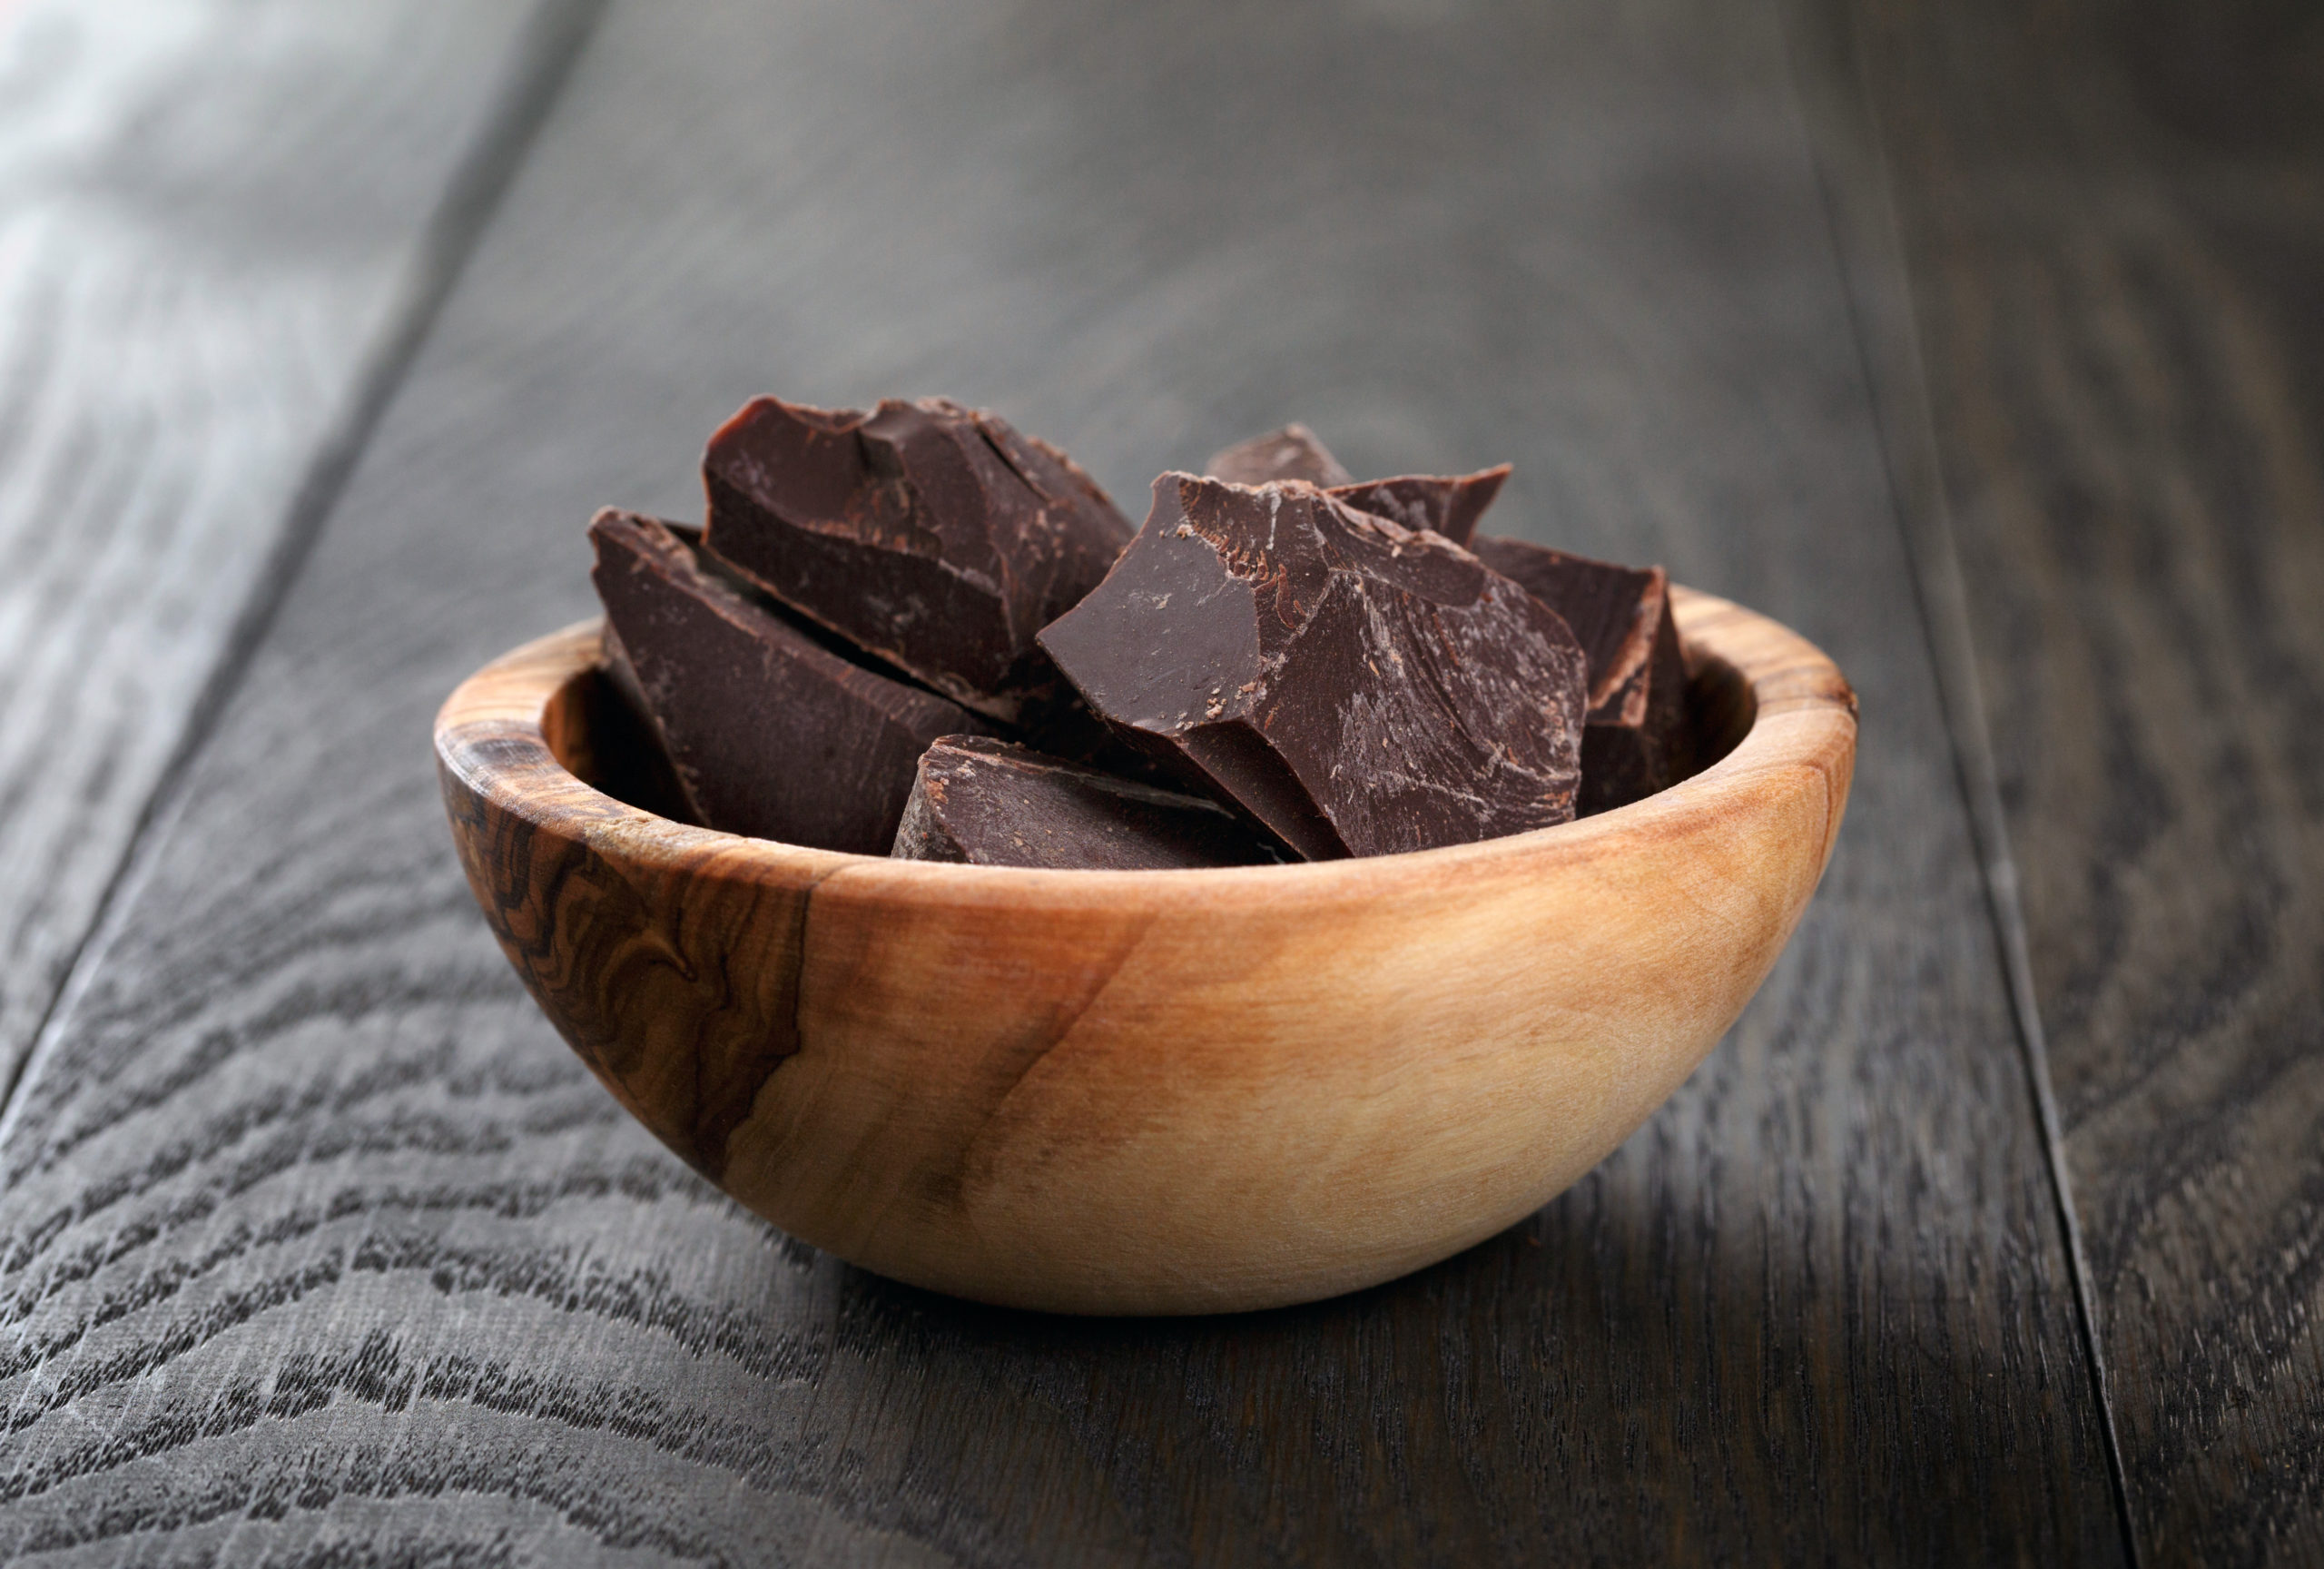 Is chocalate really good for you?